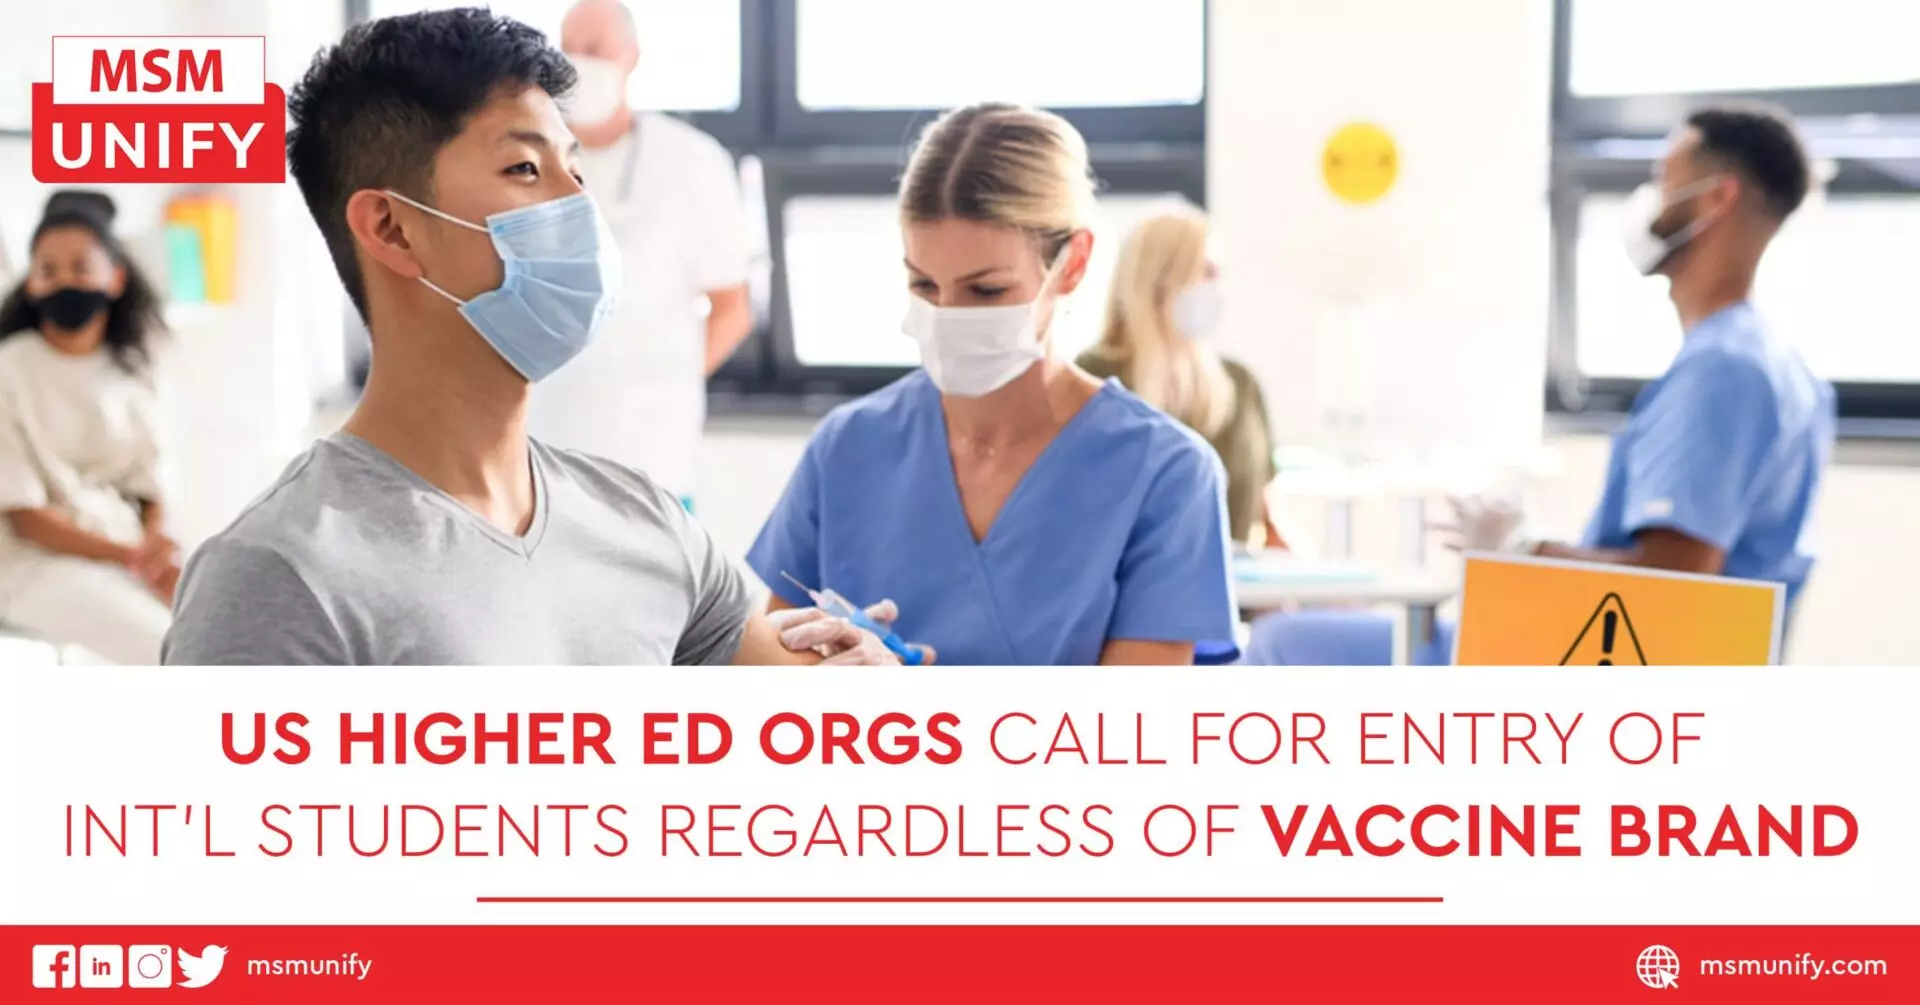 US Higher Ed Orgs Call for Entry of Intl Students Regardless of Vaccine Brand scaled 1